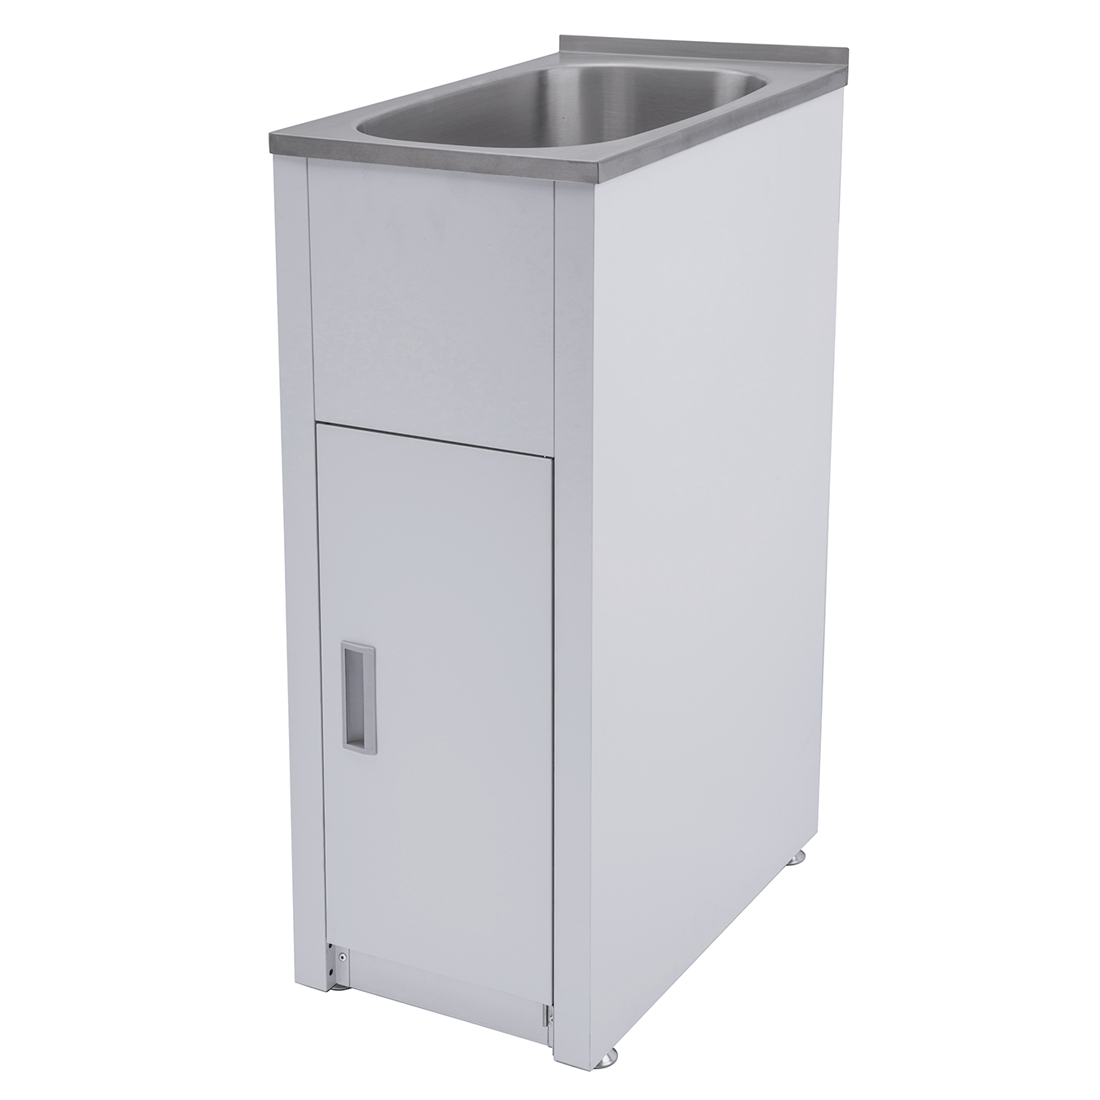 Ovia 30L Skinny Laundry Tub and Cabinet Stainless Steel